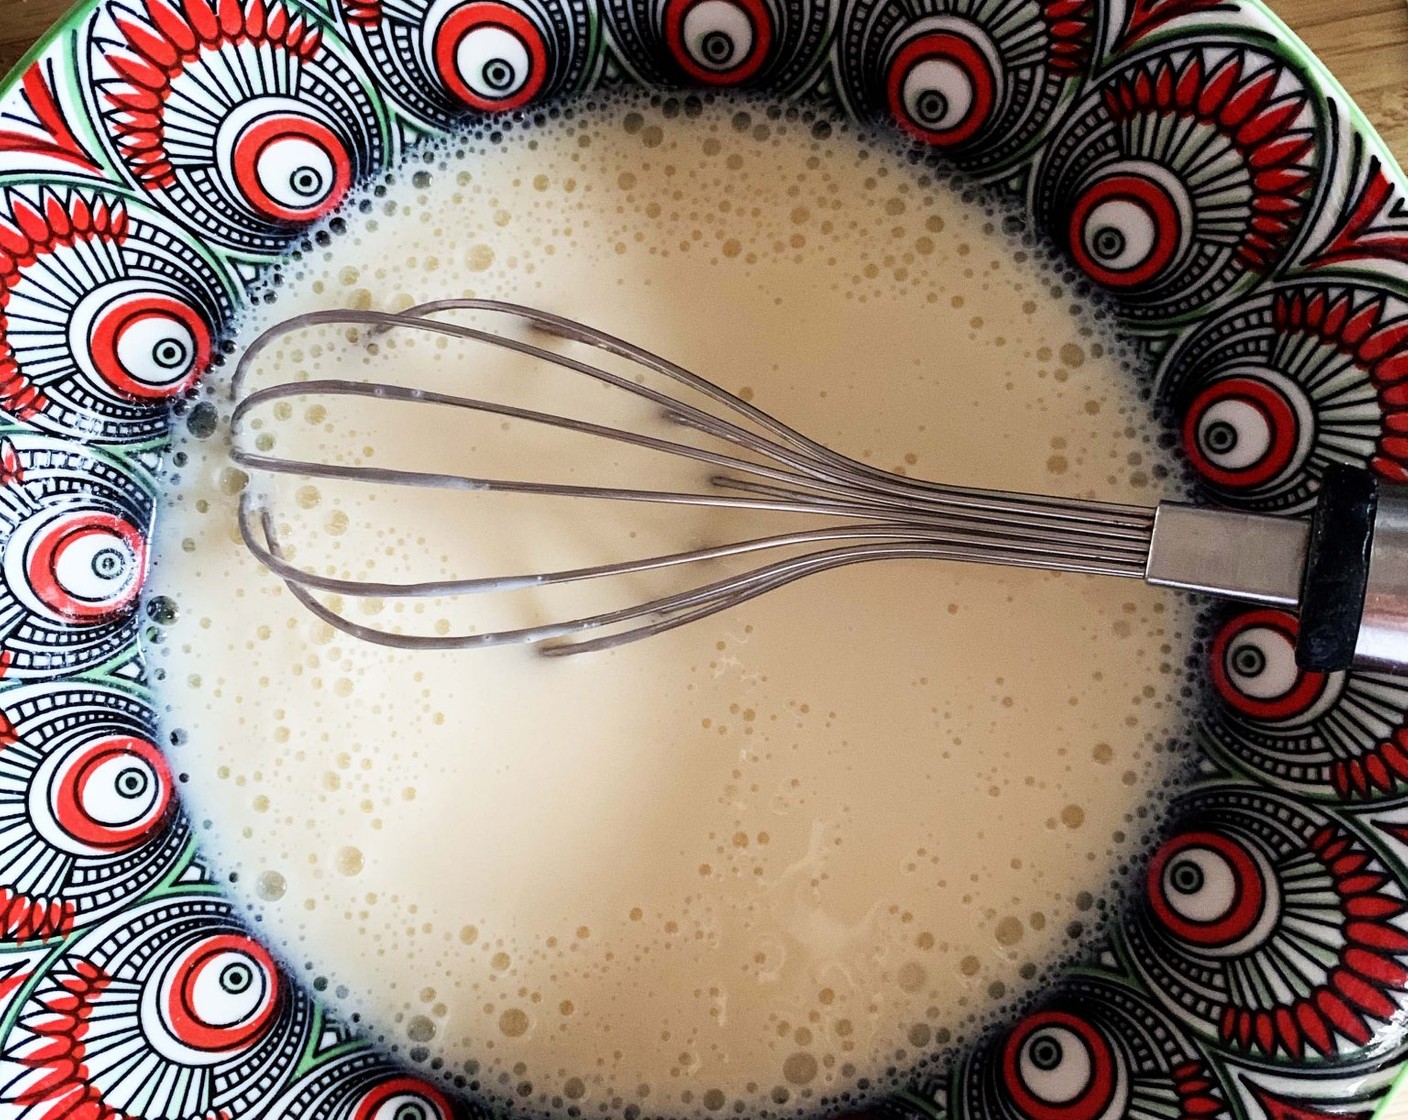 step 2 In a bowl whisk together Egg (3/4 cup), Soy Yogurt (2/3 cup), and Granulated Erythritol (2 Tbsp).